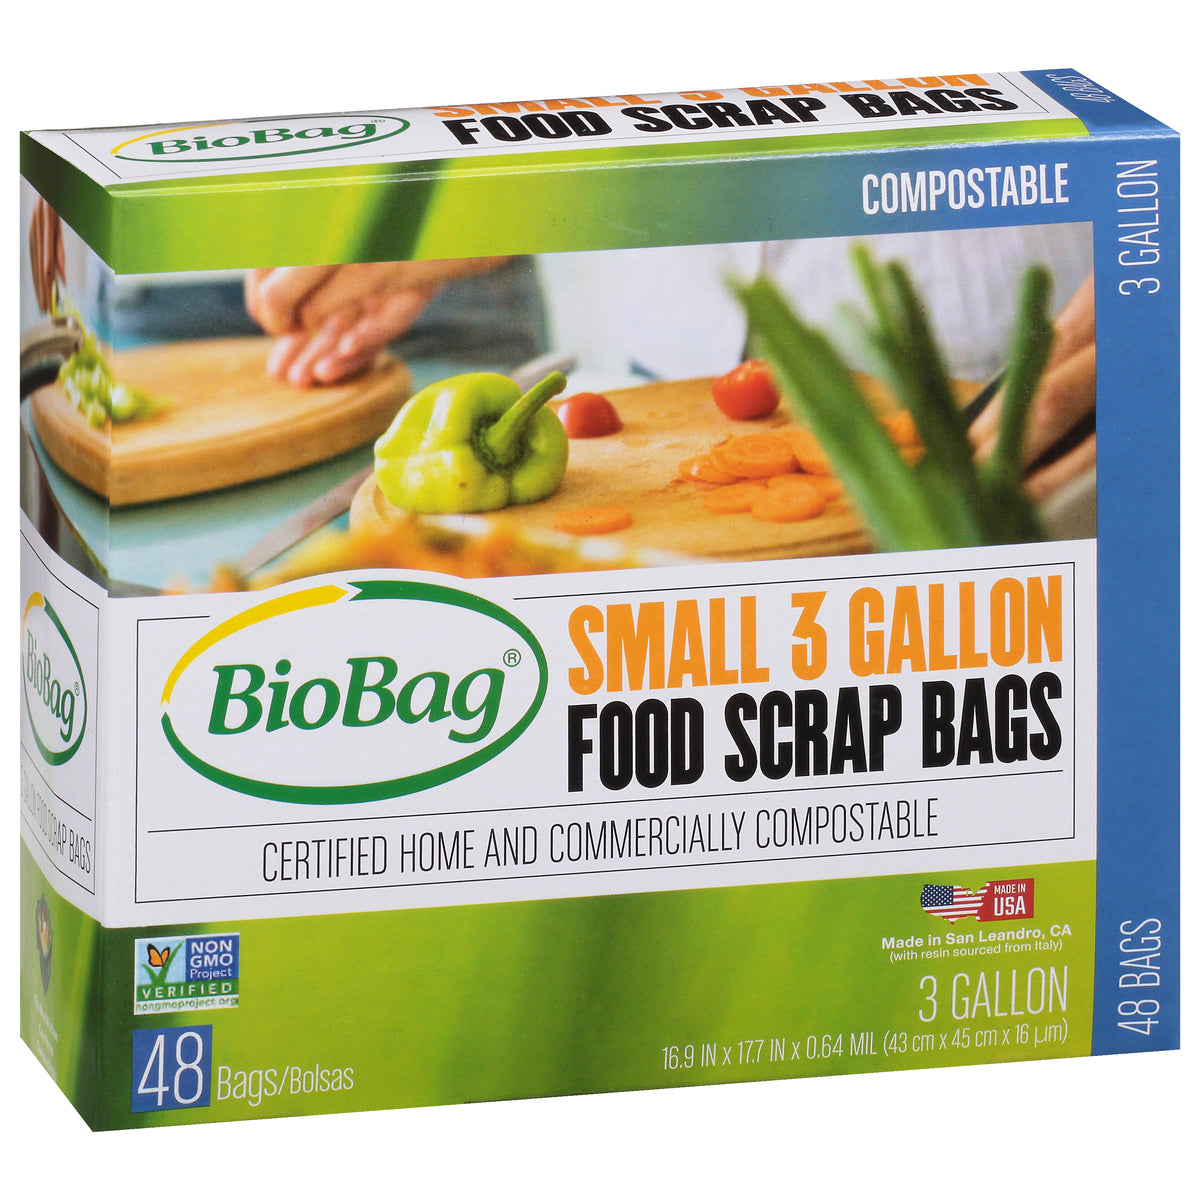 48 gallons biodegradable garbage bags, Certified